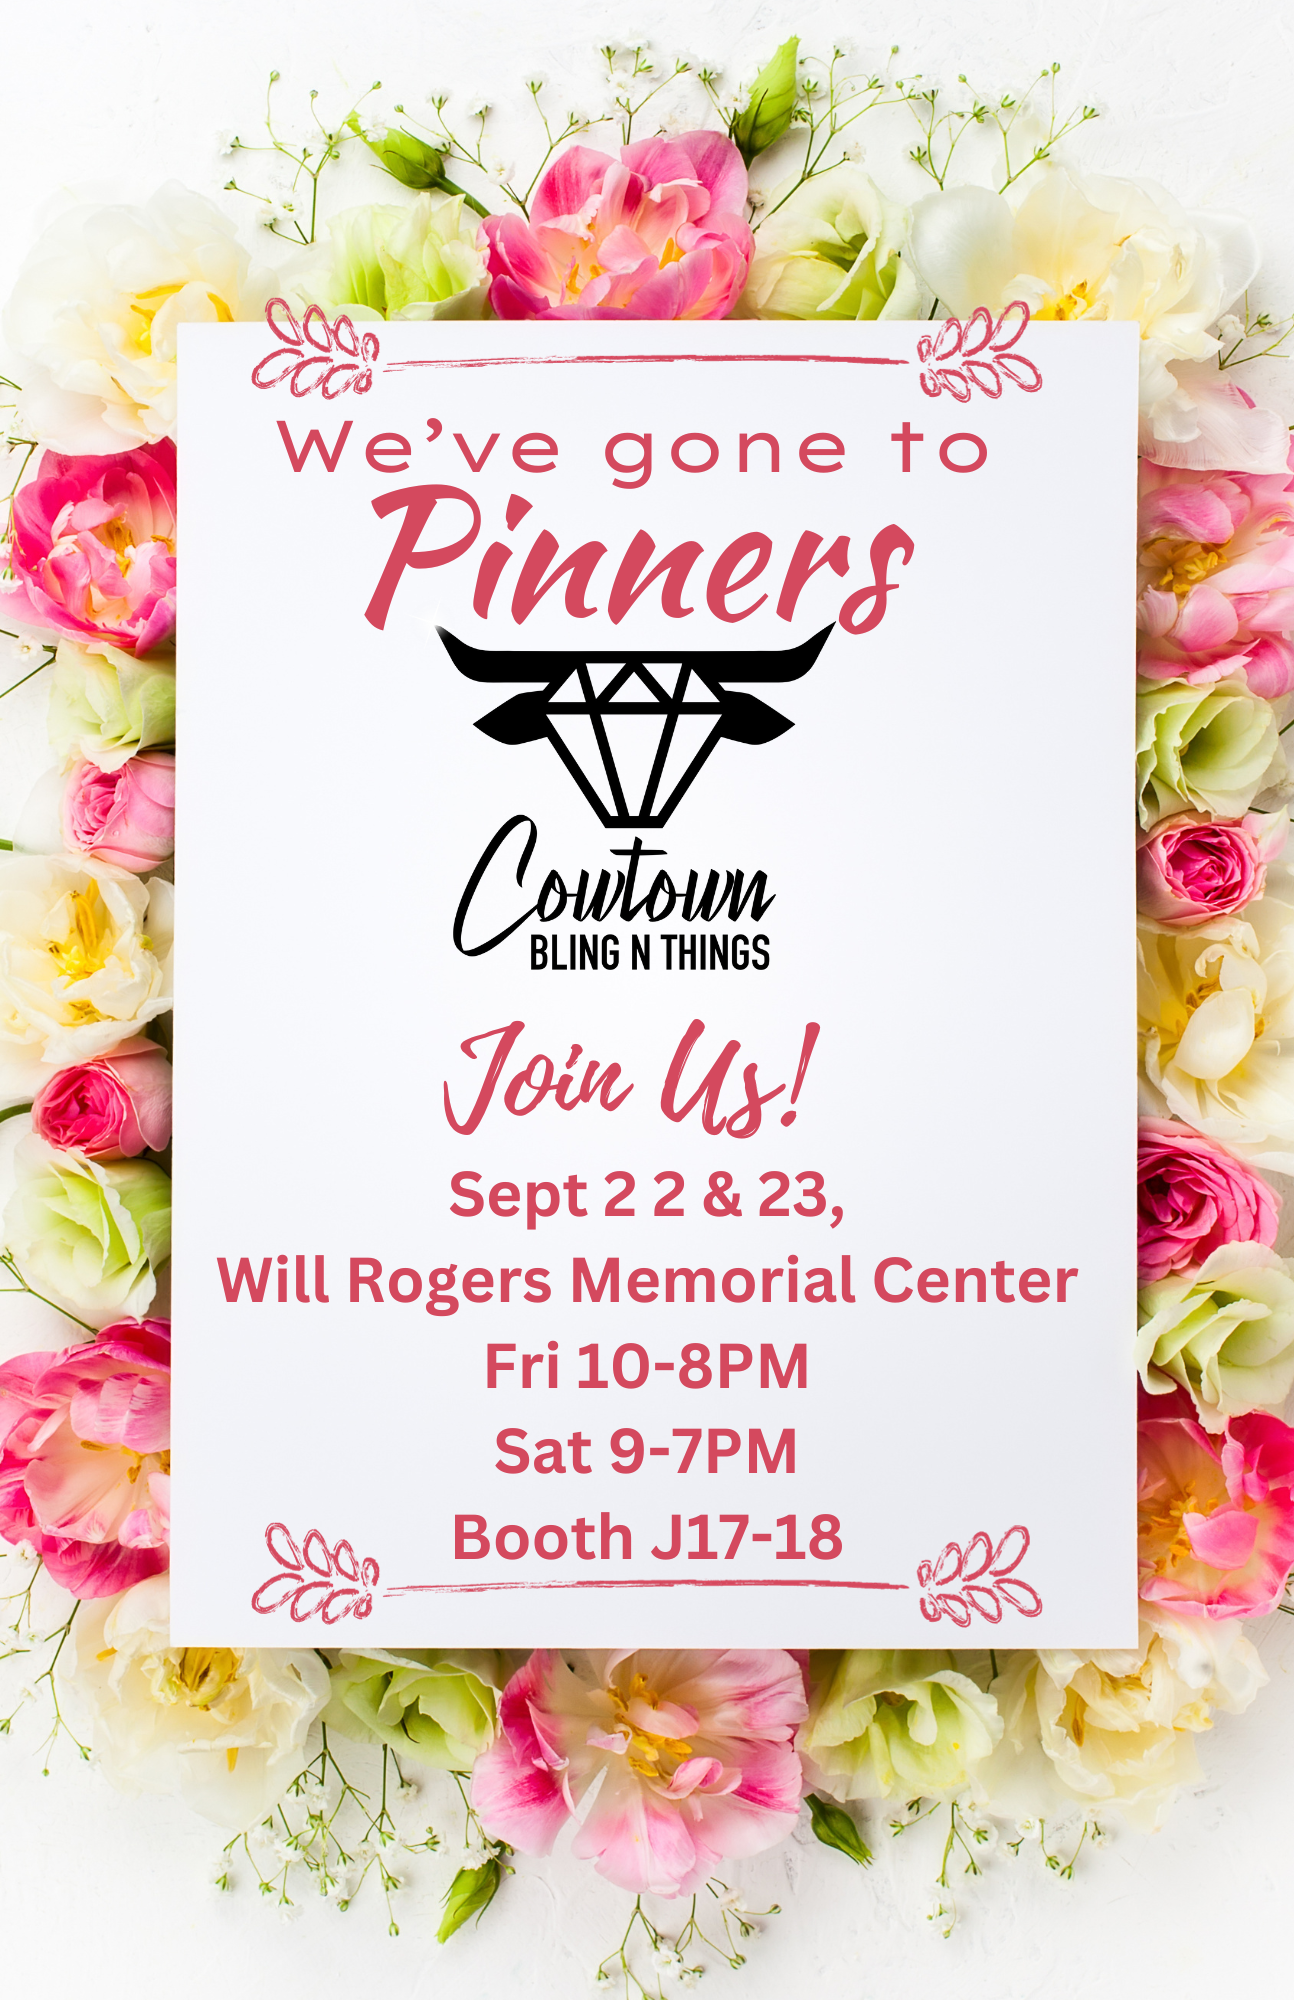 Come learn, create & connect at Pinners!